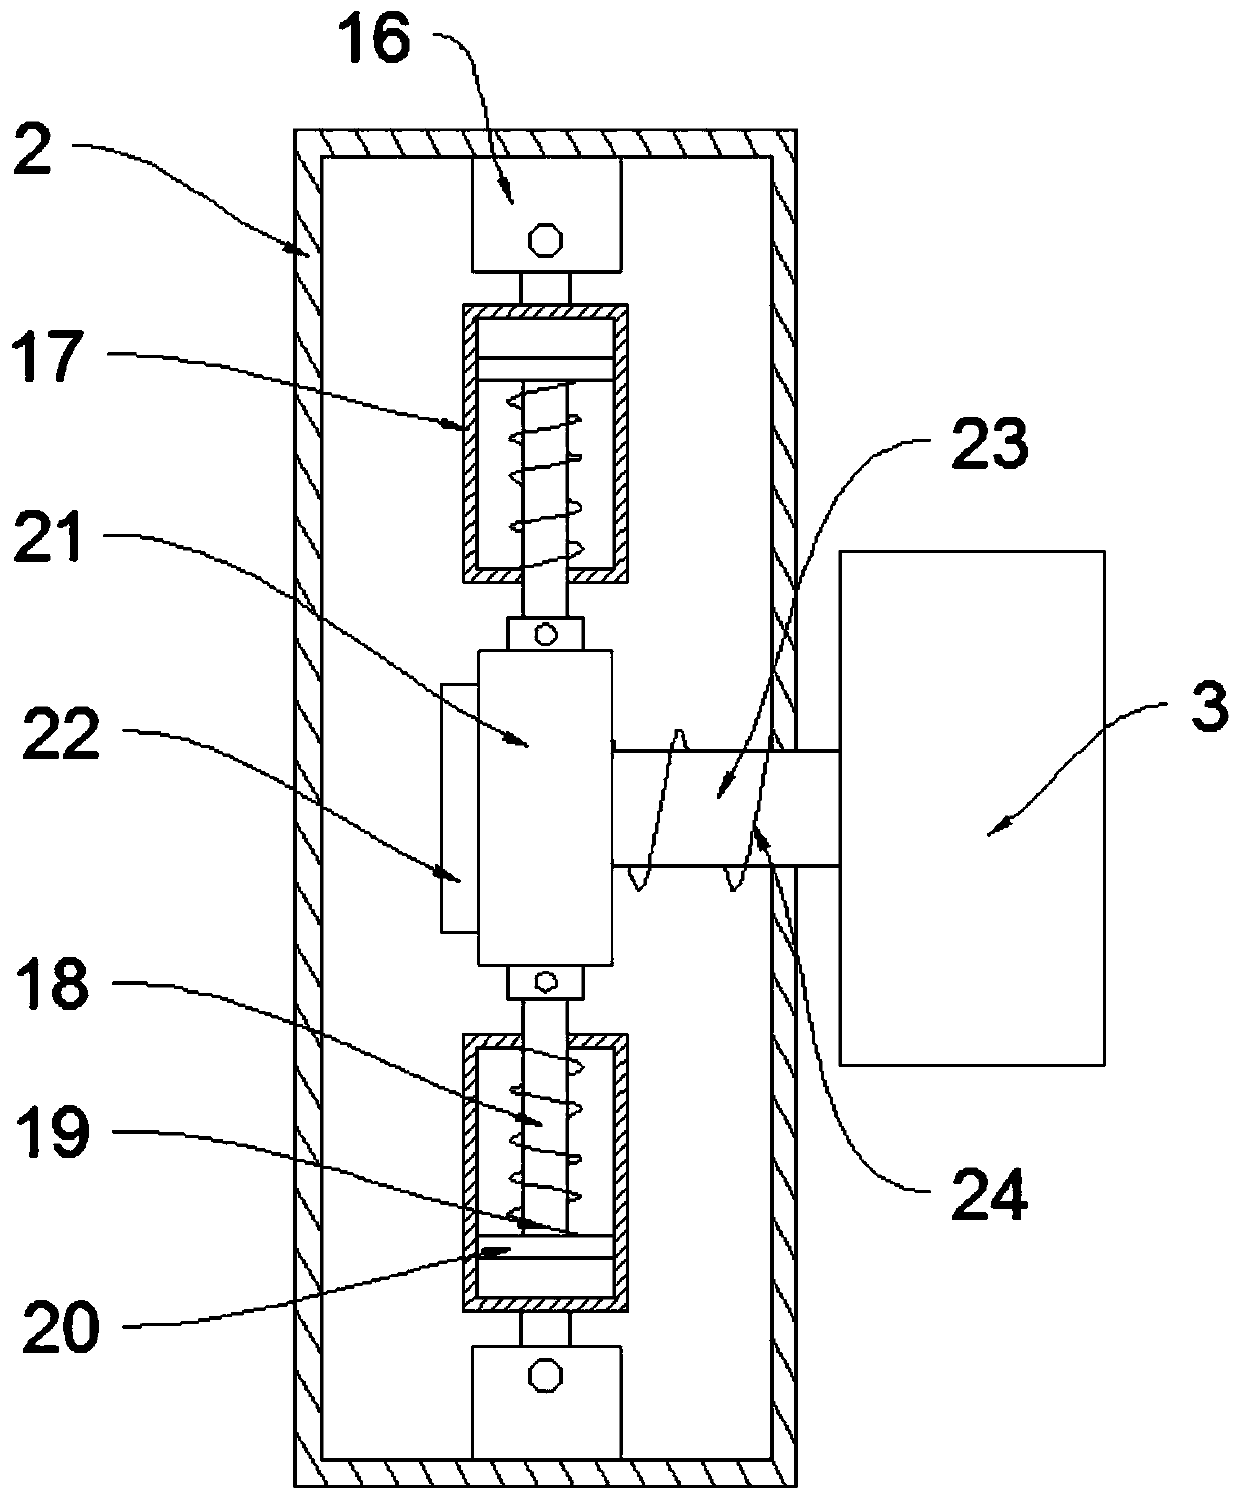 Goods conveying device